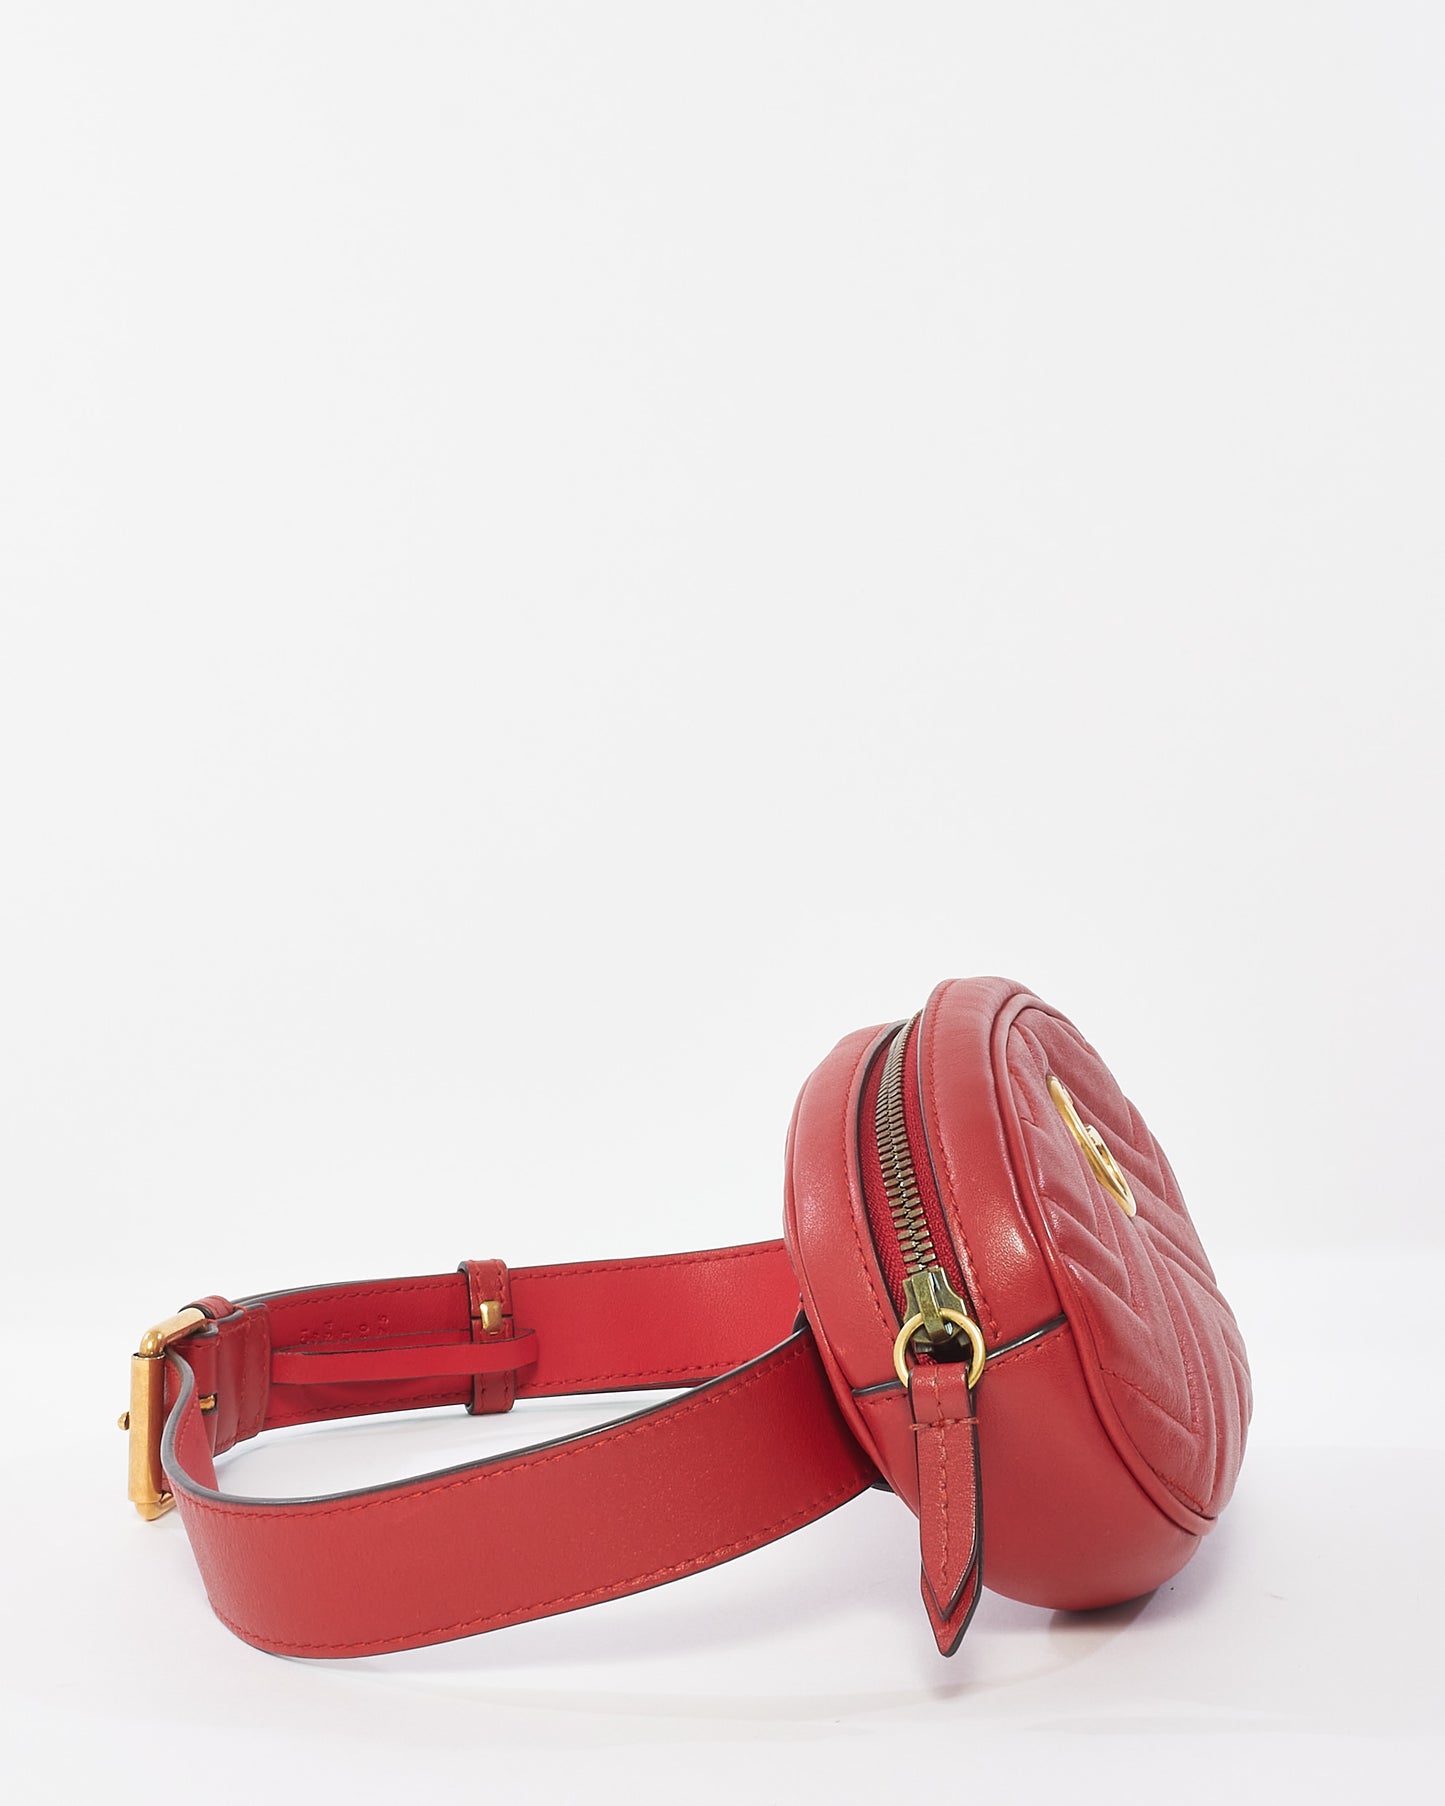 Gucci Red Leather GG Marmont Belt Bag - 75/30